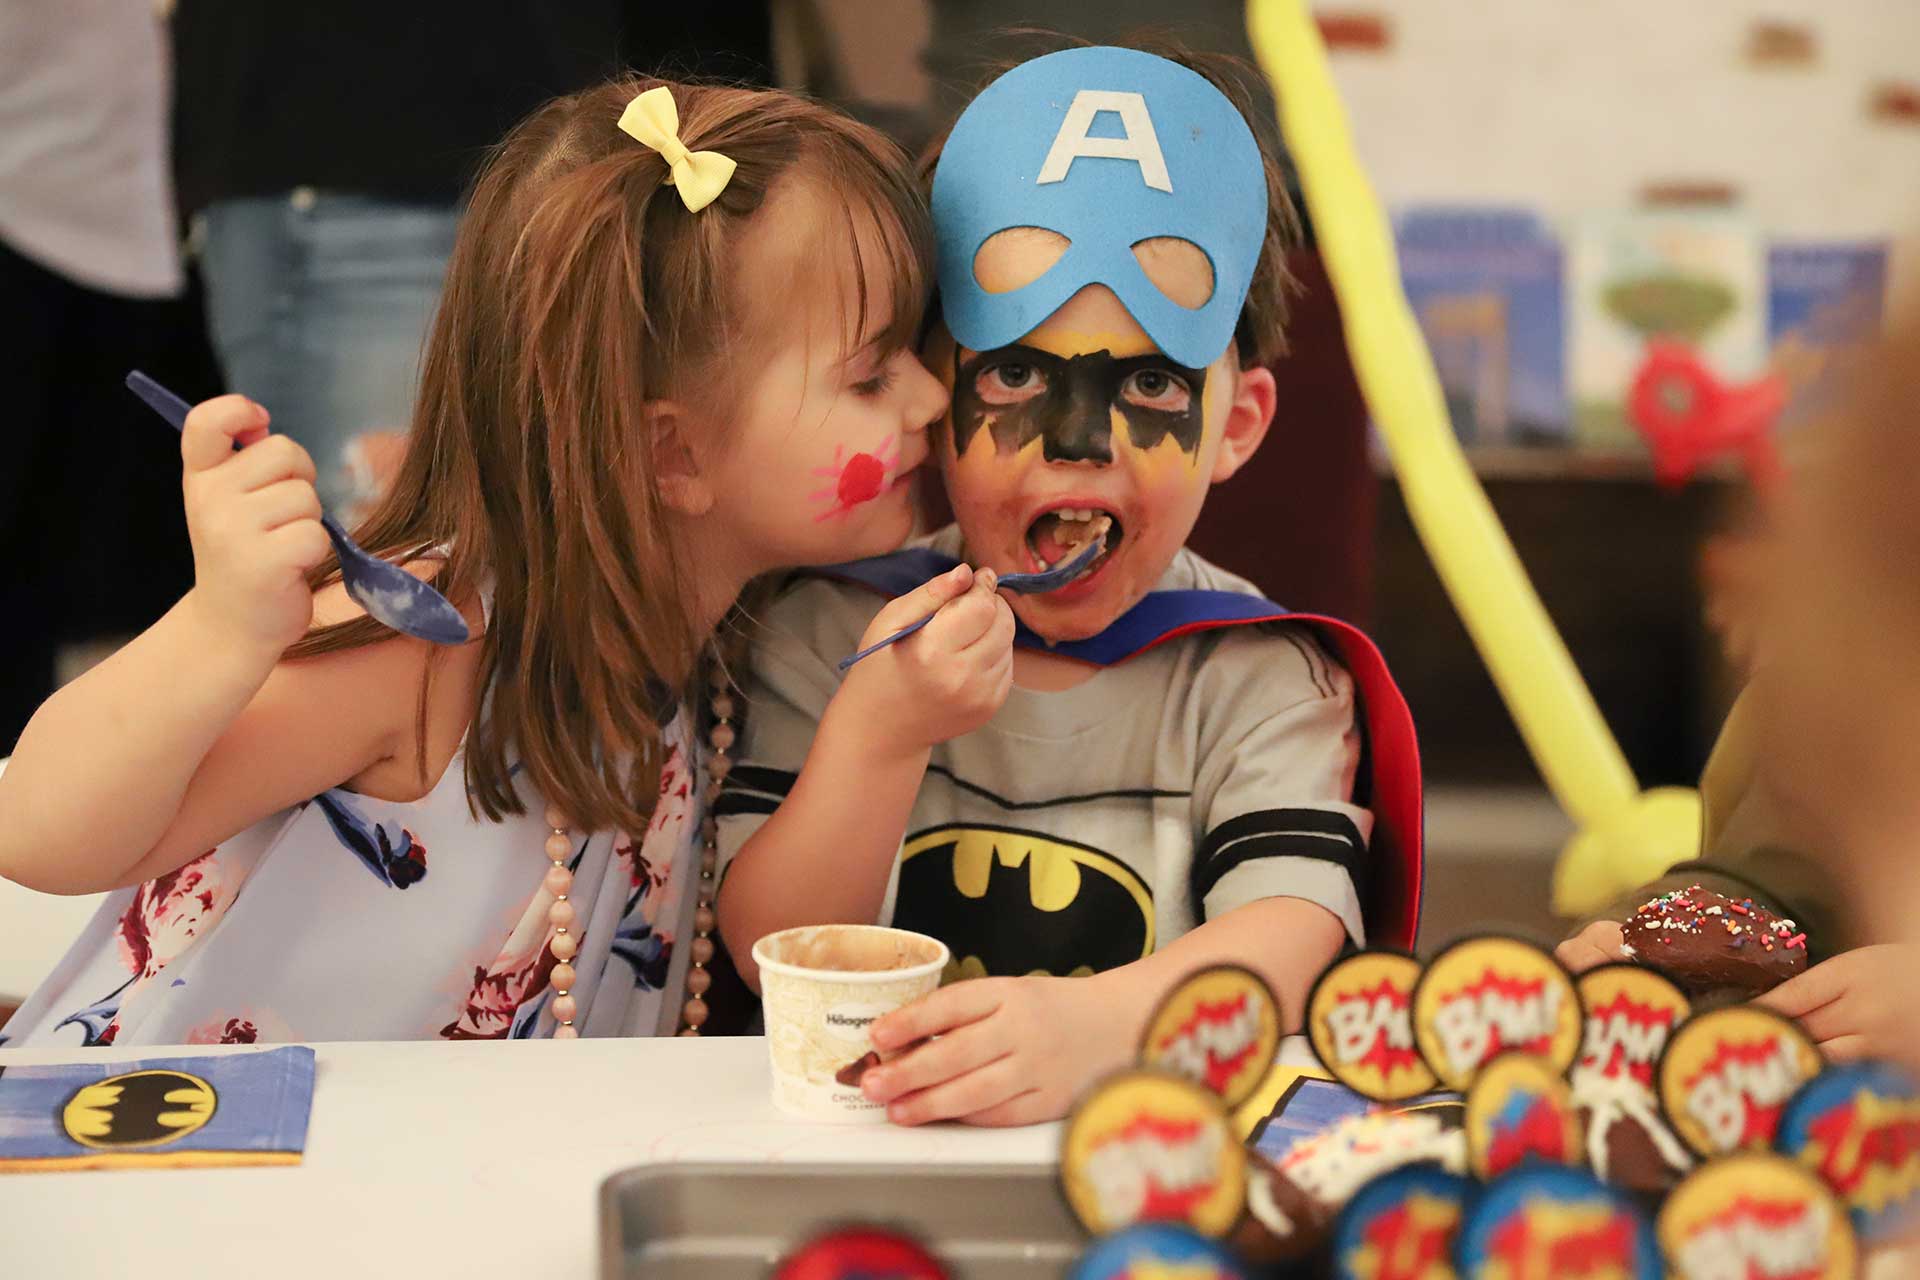 A boy and a girl wearing clown makeup and party clothes eating a dessert while the girl gives the boy a kiss on the cheek